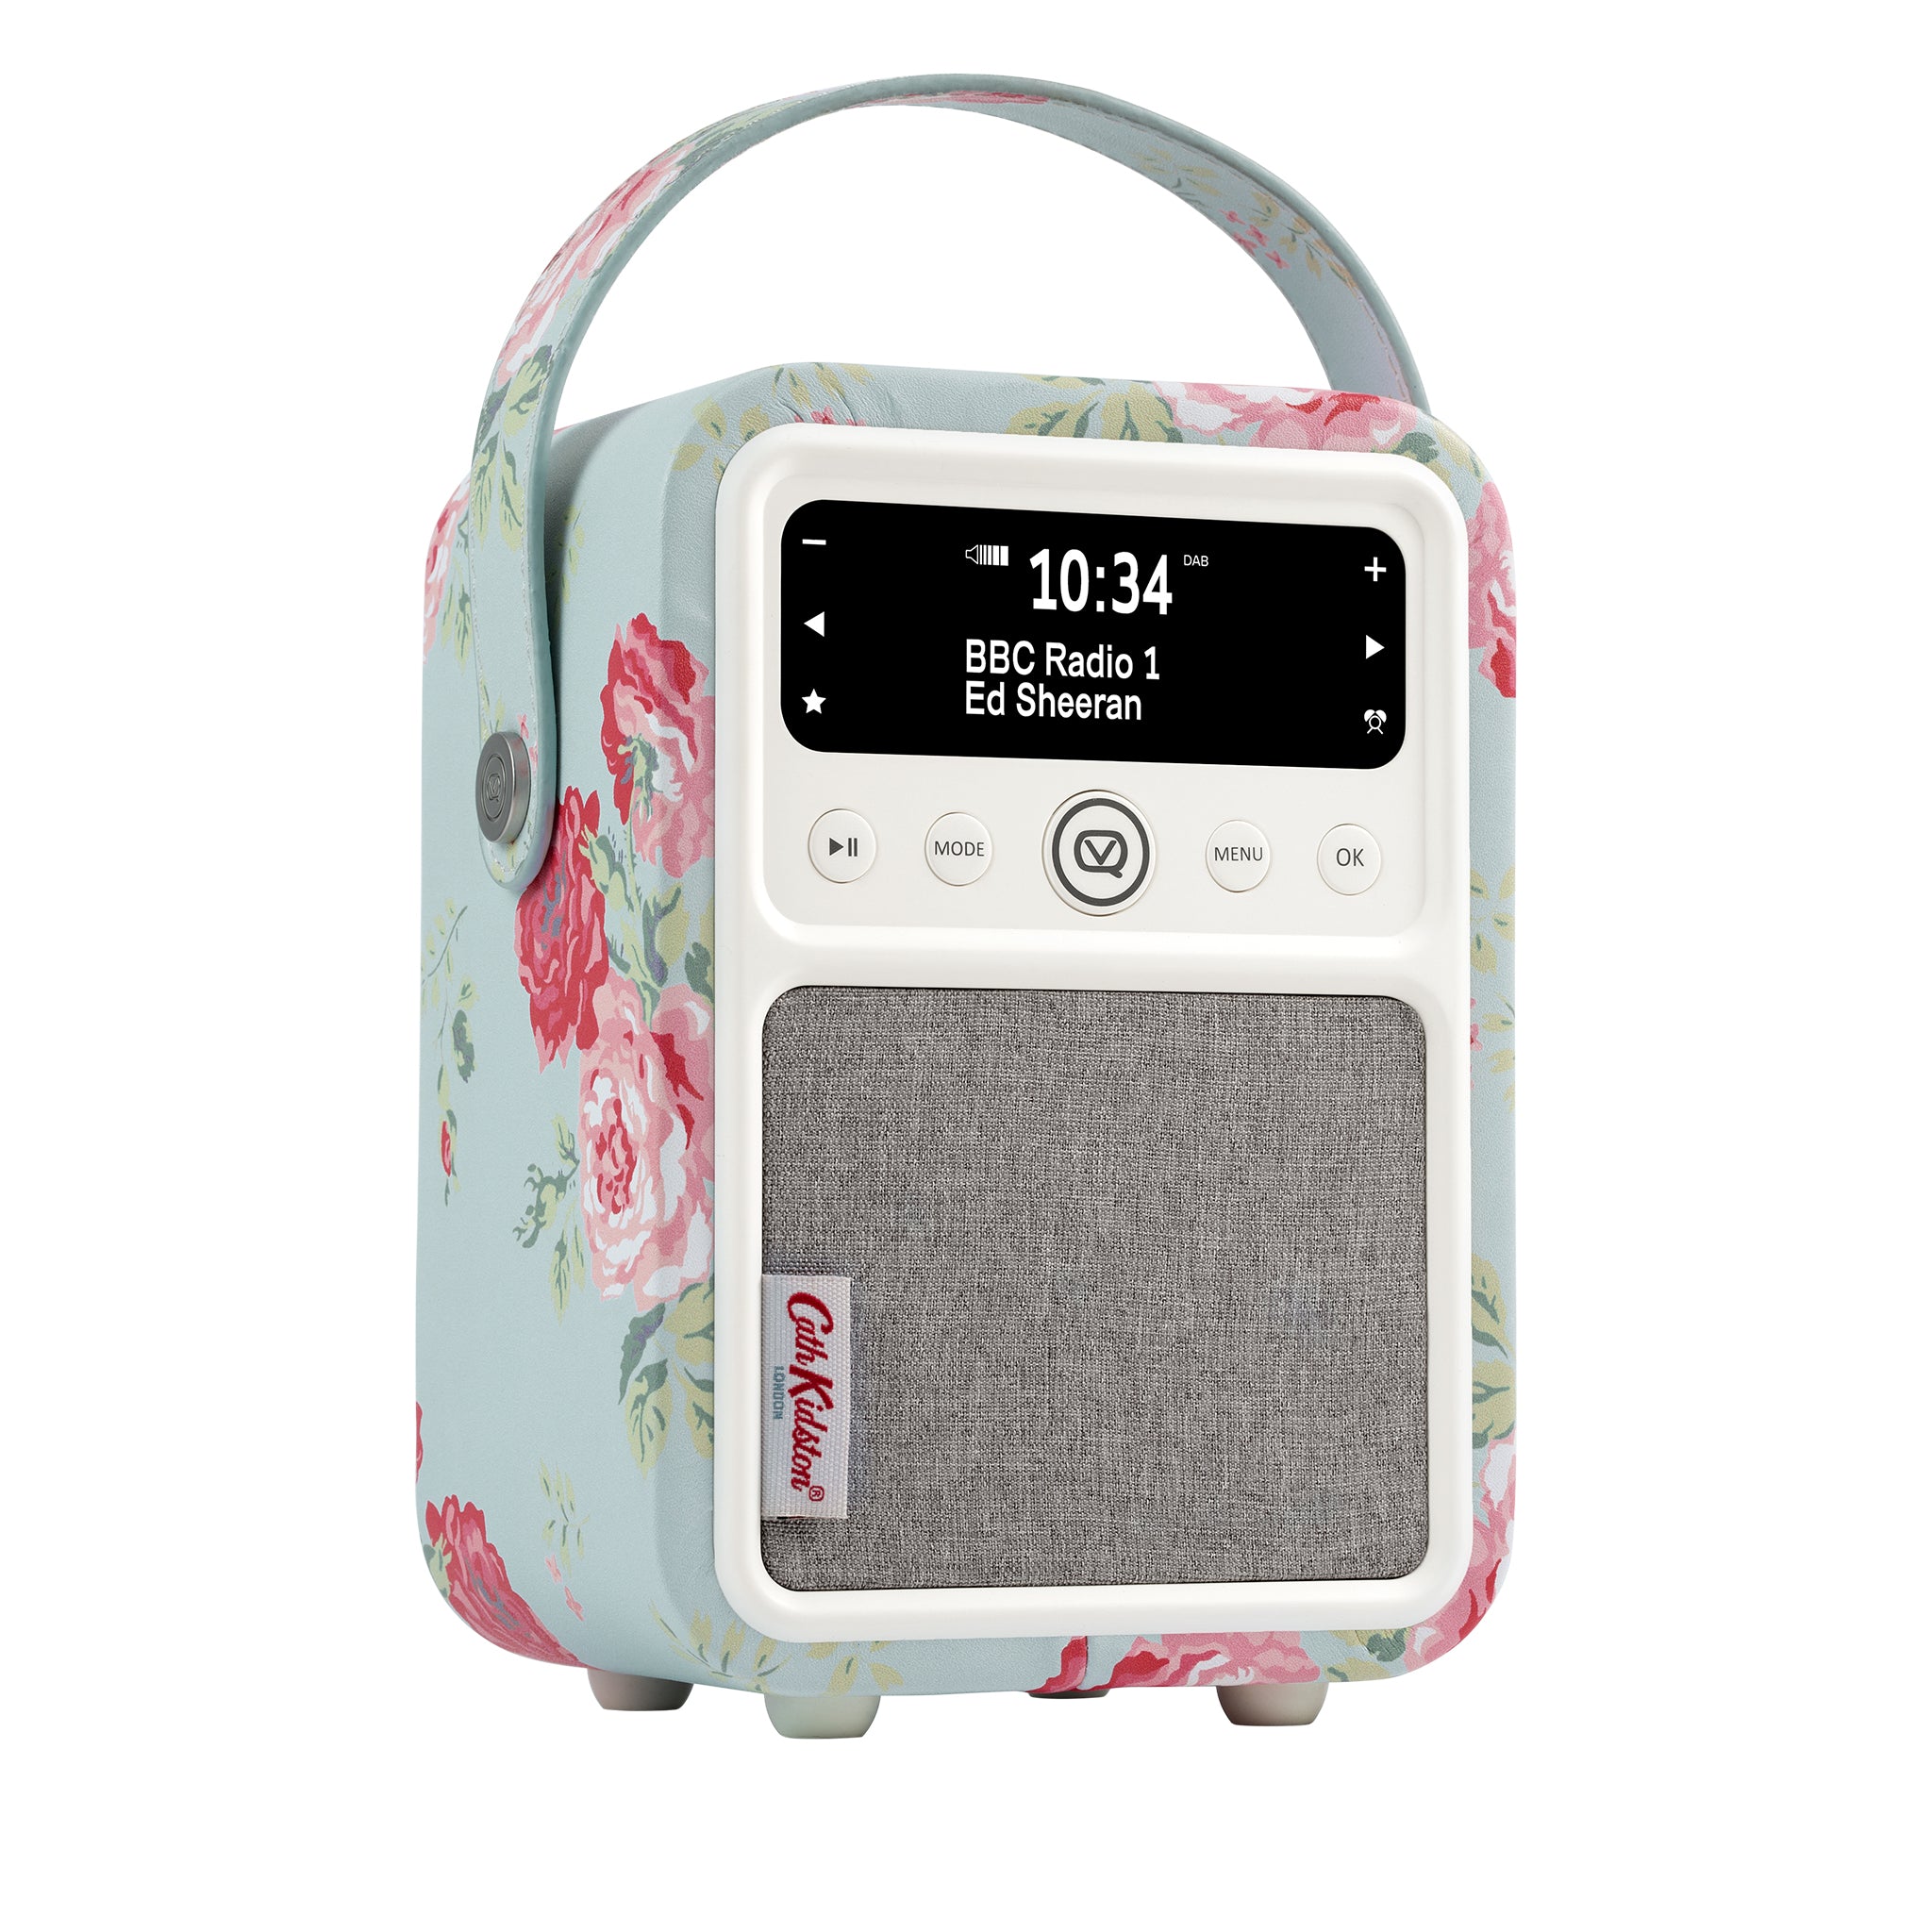 The Cath Kidston collection includes a range of Digital Radios as well as must-have Mobile Accessories, all available in a wide range of patterns to perfectly complete your home.